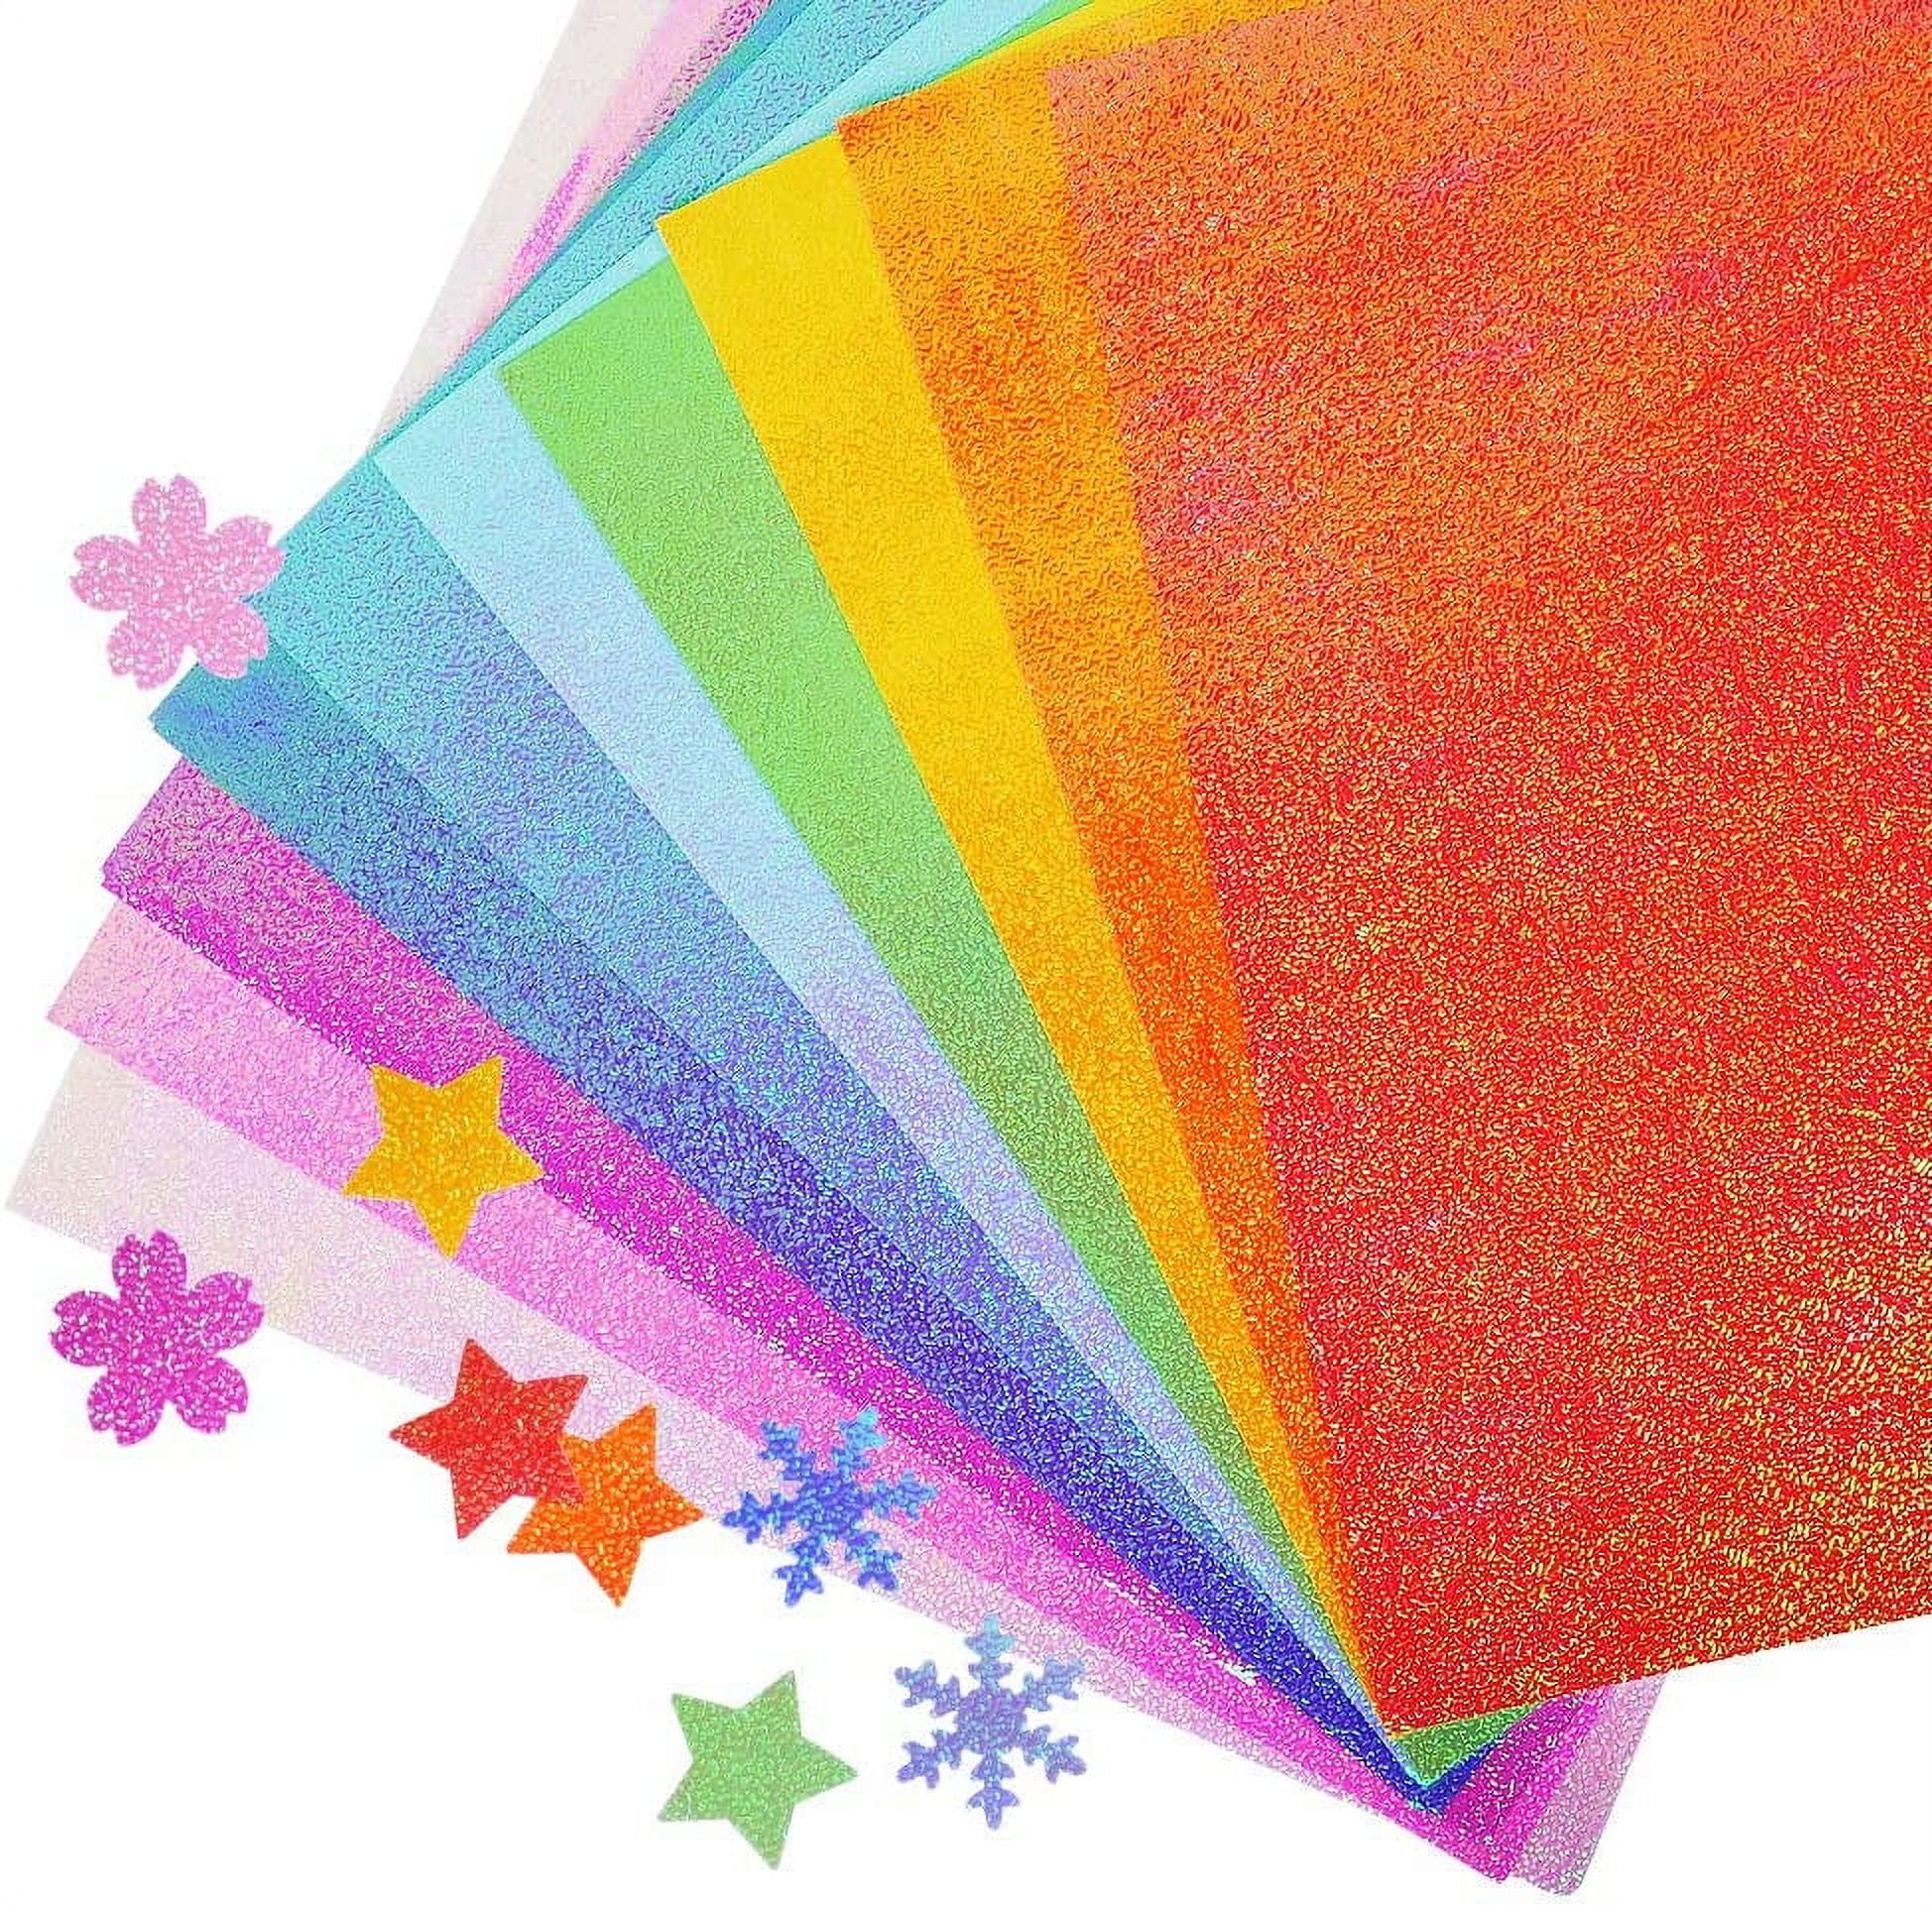 Differences Between Metallic, Pearlescent, Shimmer Paper